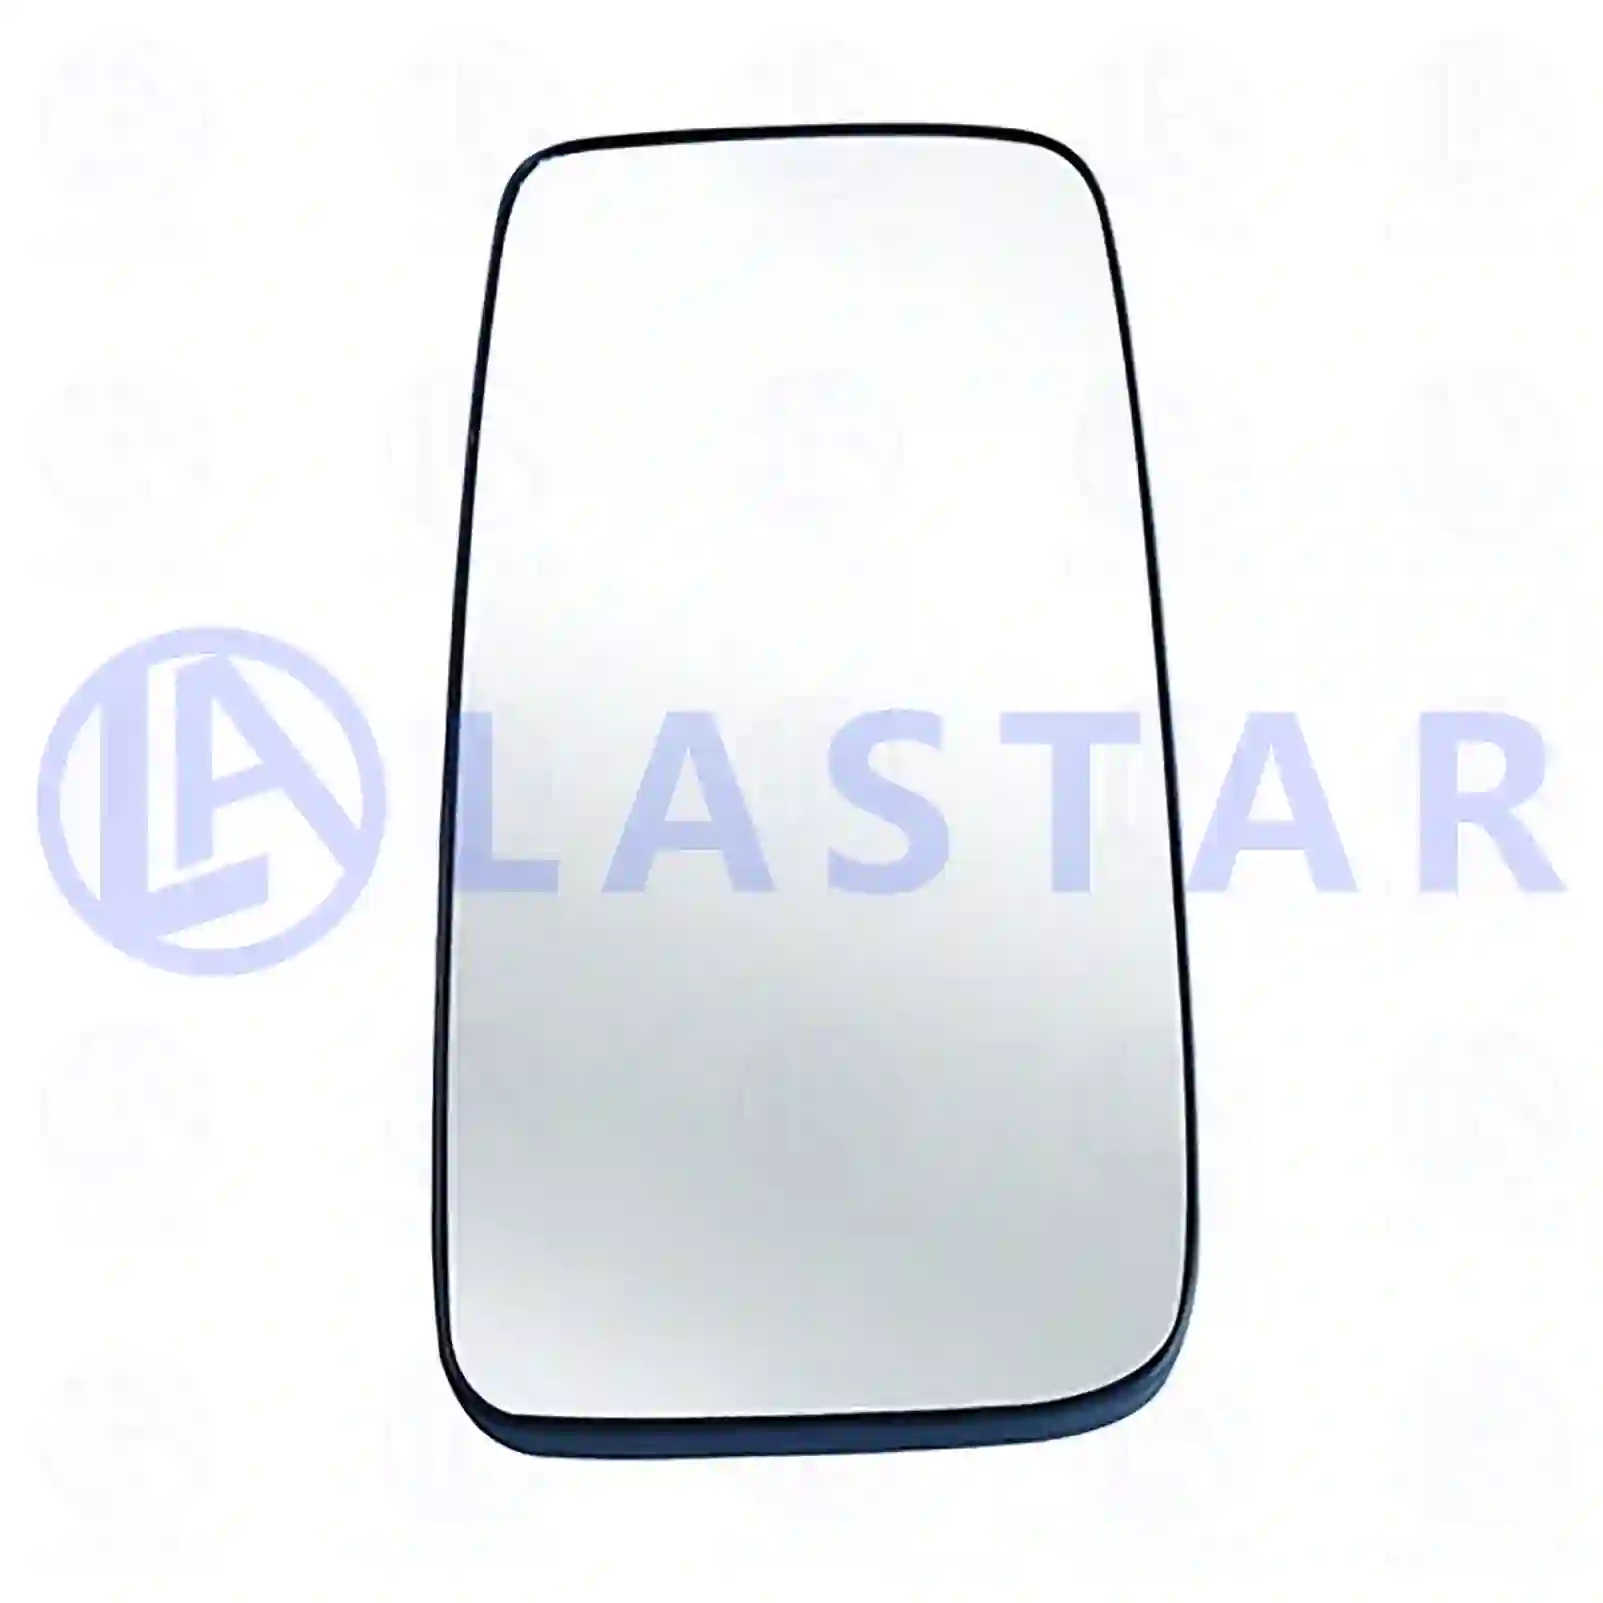 Mirror glass, main mirror, heated, 77719945, 02997667, 2997667, 504197878, ZG61001-0008 ||  77719945 Lastar Spare Part | Truck Spare Parts, Auotomotive Spare Parts Mirror glass, main mirror, heated, 77719945, 02997667, 2997667, 504197878, ZG61001-0008 ||  77719945 Lastar Spare Part | Truck Spare Parts, Auotomotive Spare Parts